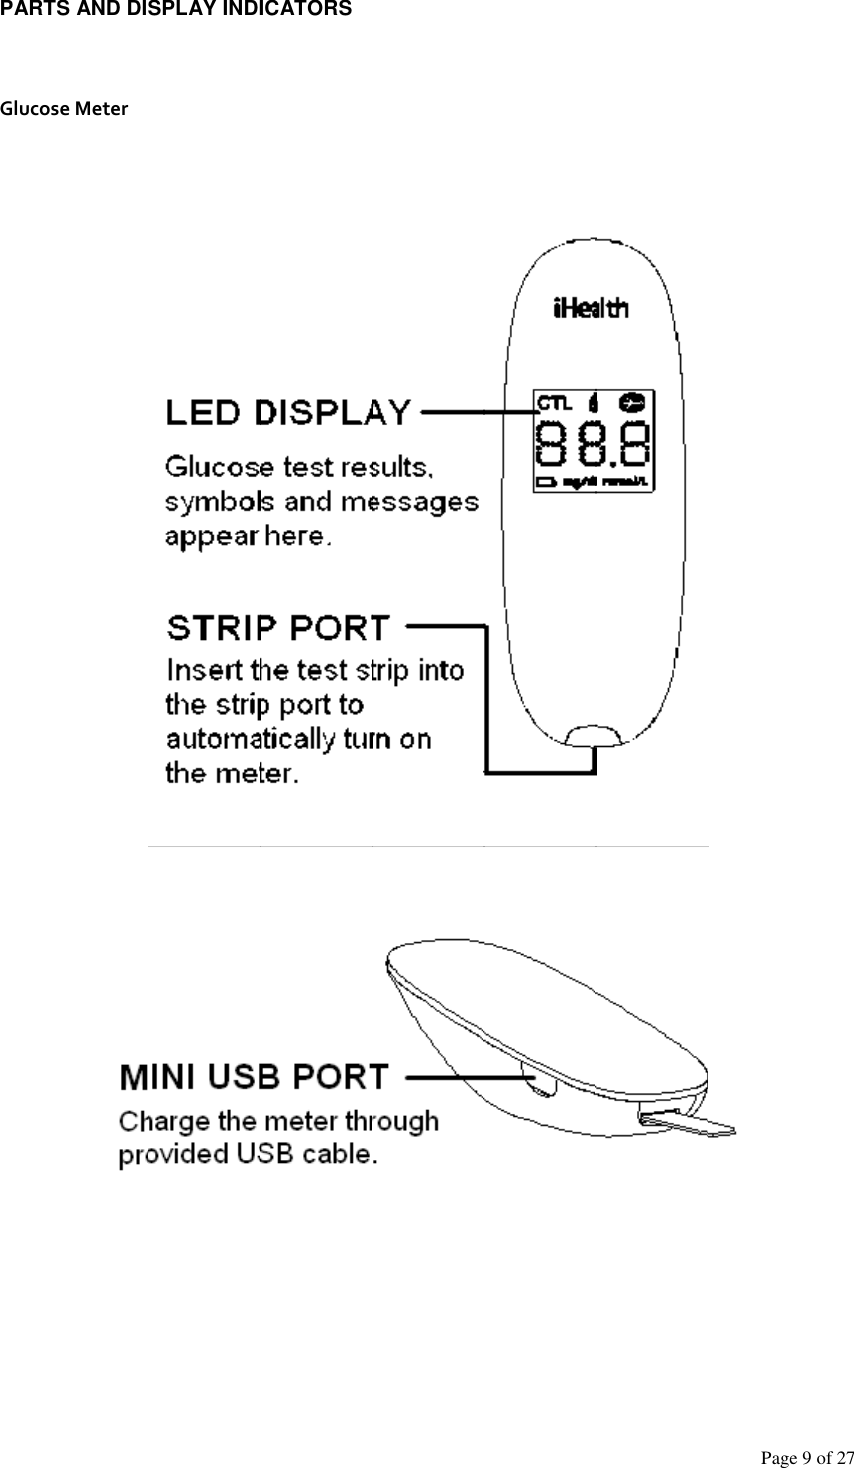 Page 9 of 27                 PARTS AND DISPLAY INDICATORS     Glucose Meter 